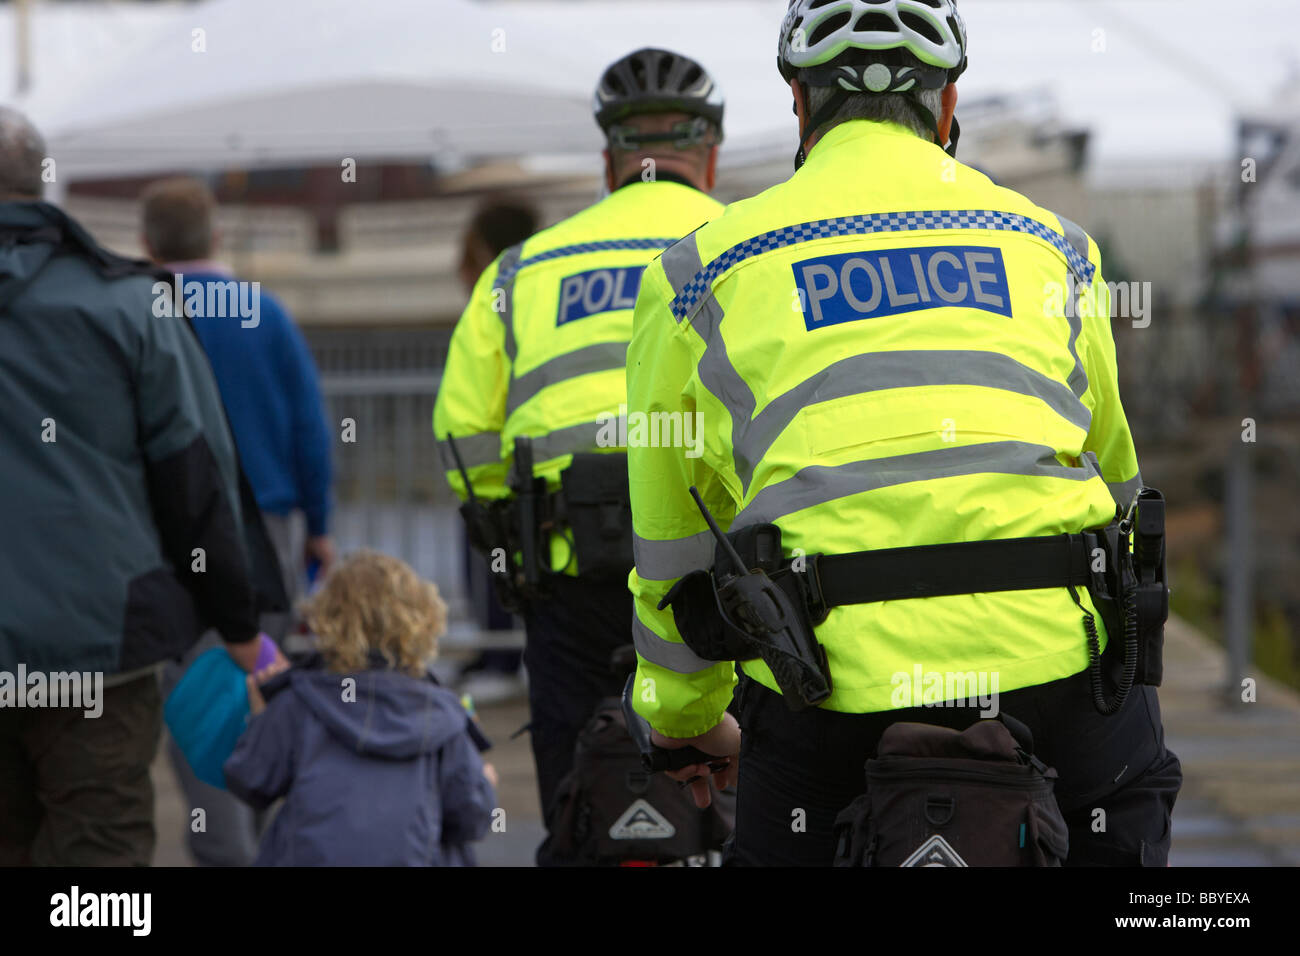 psni police officers on mountain bikes mobile patrol during event in northern ireland uk Stock Photo